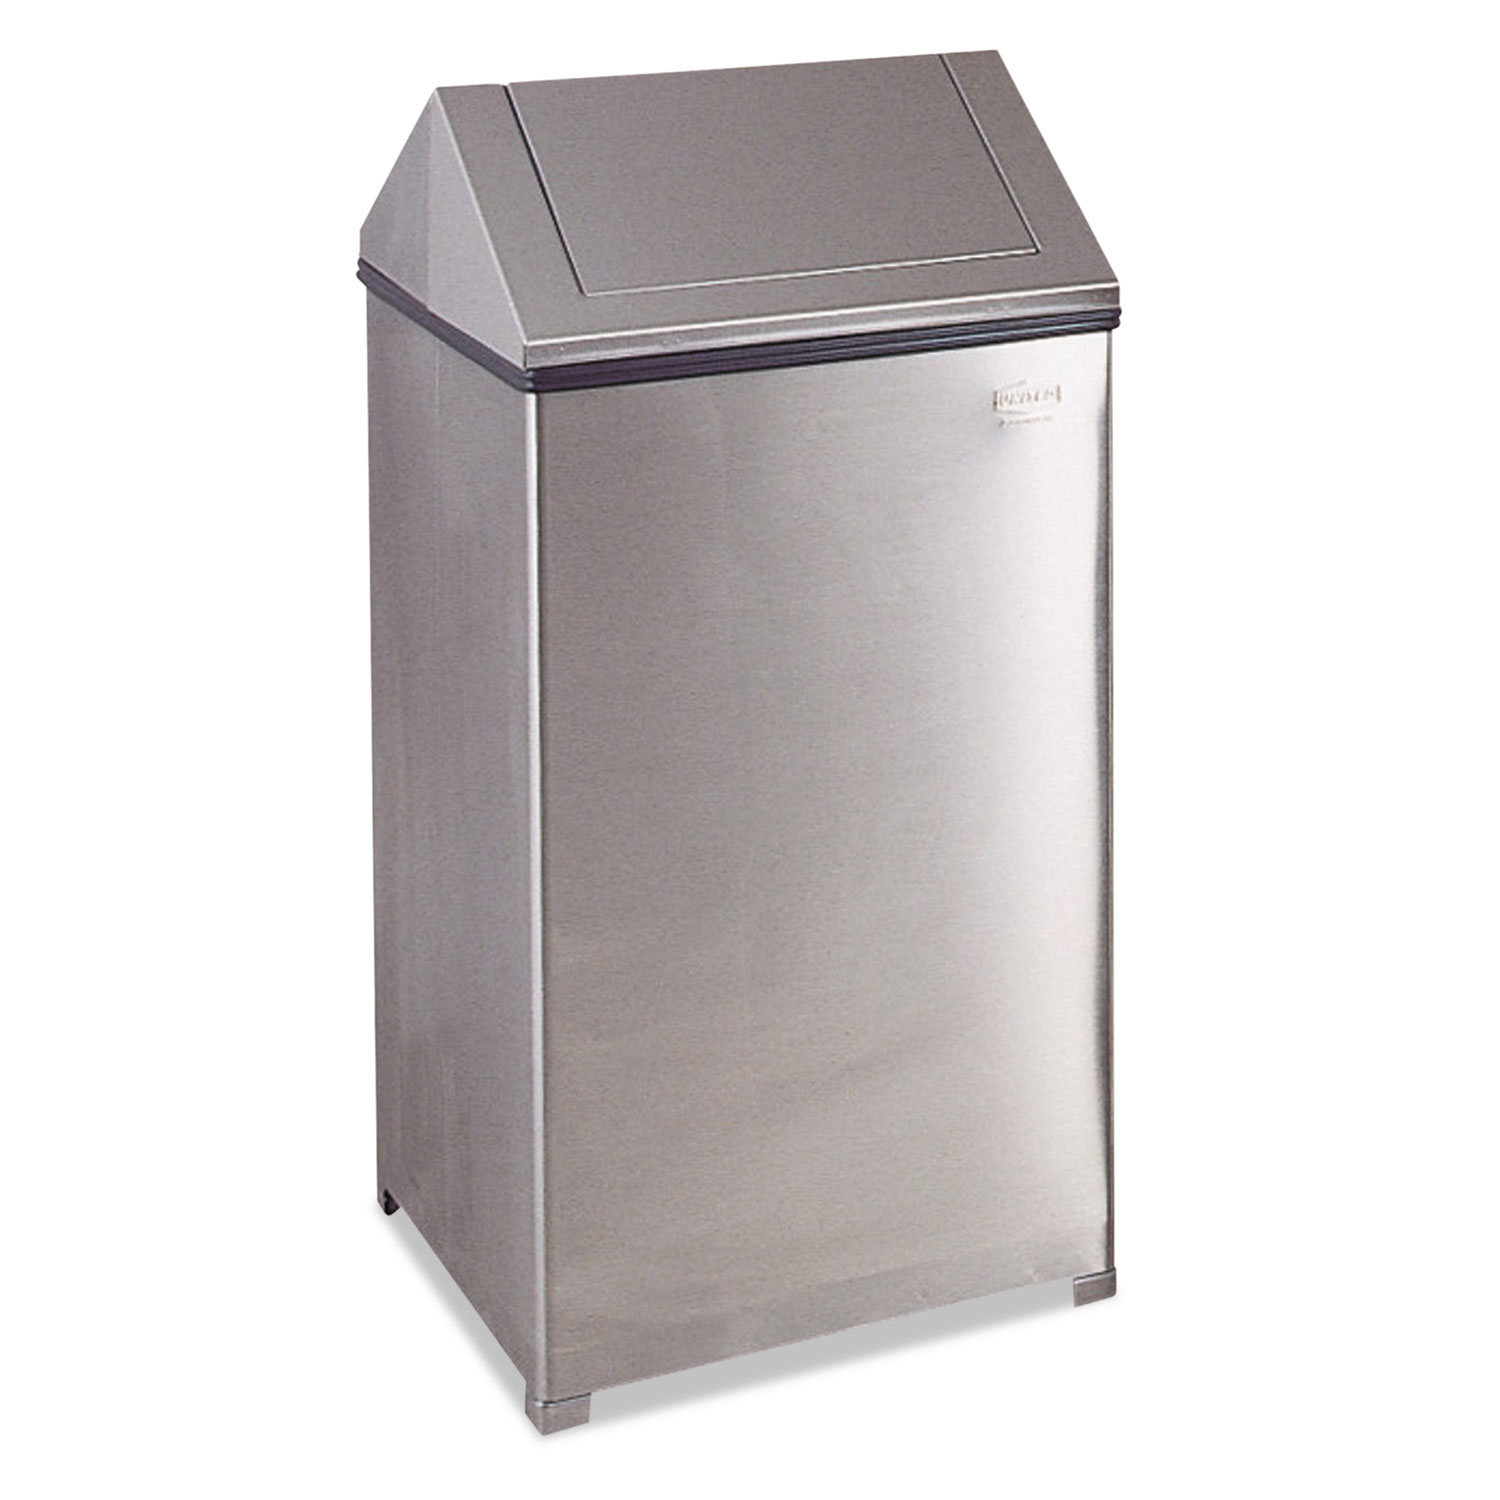 Fire-Safe Swing Top Receptacle, Square, Steel, 40 gal, Stainless Steel